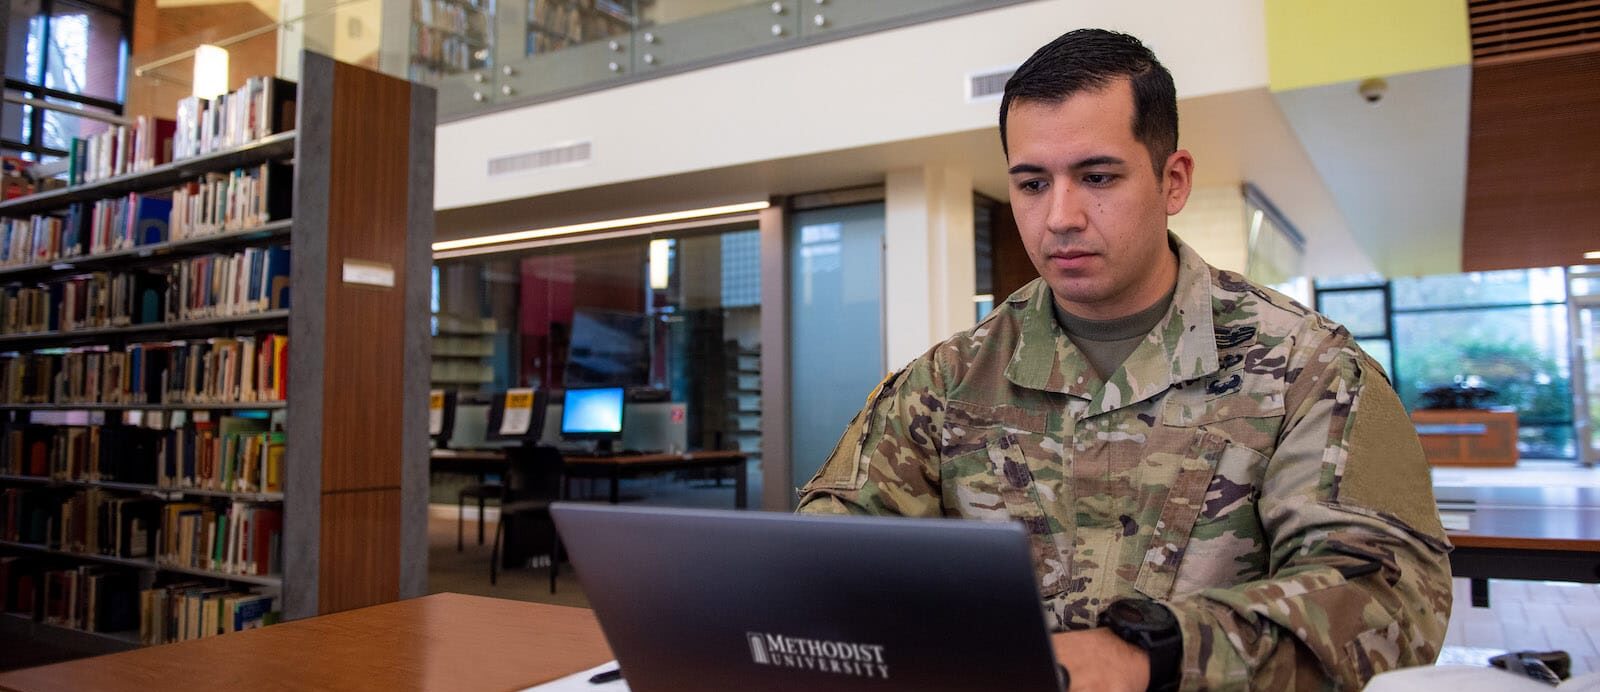 man in uniform working on laptop in library